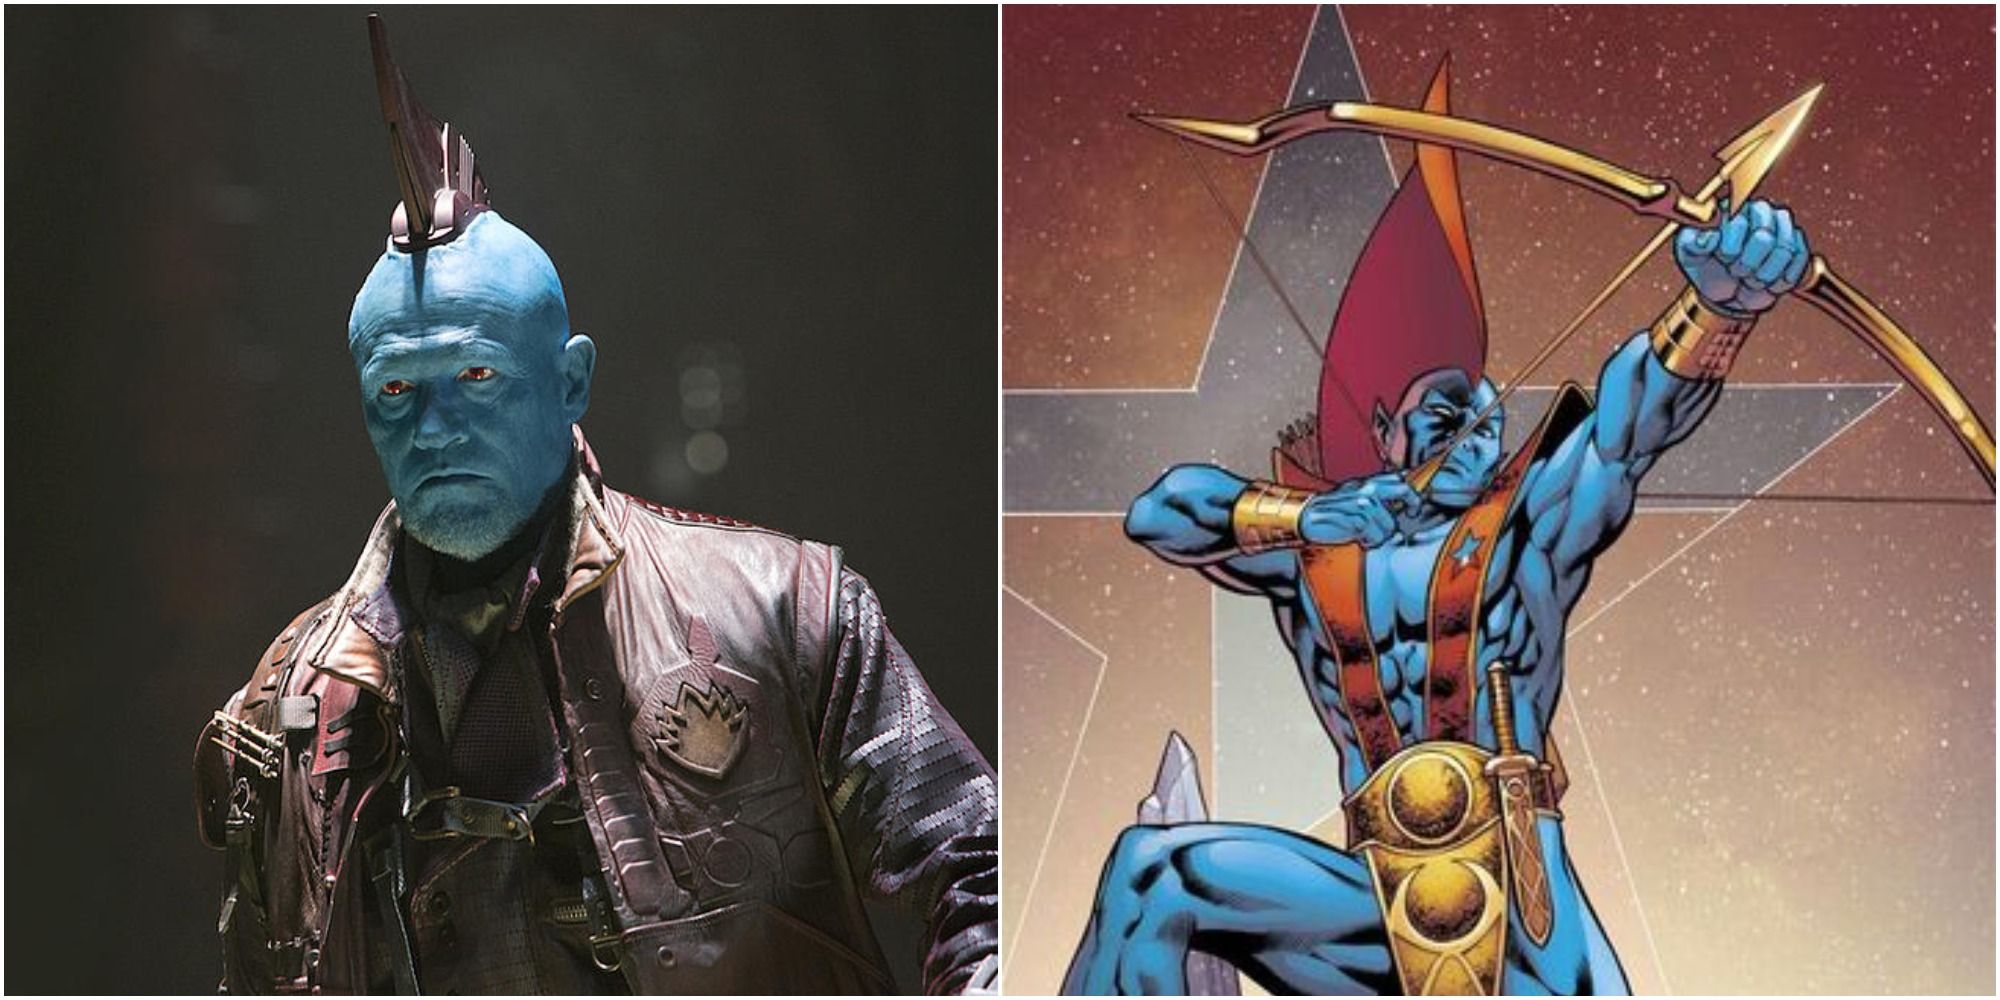 The MCU version of Yondu and his comic book counterpart